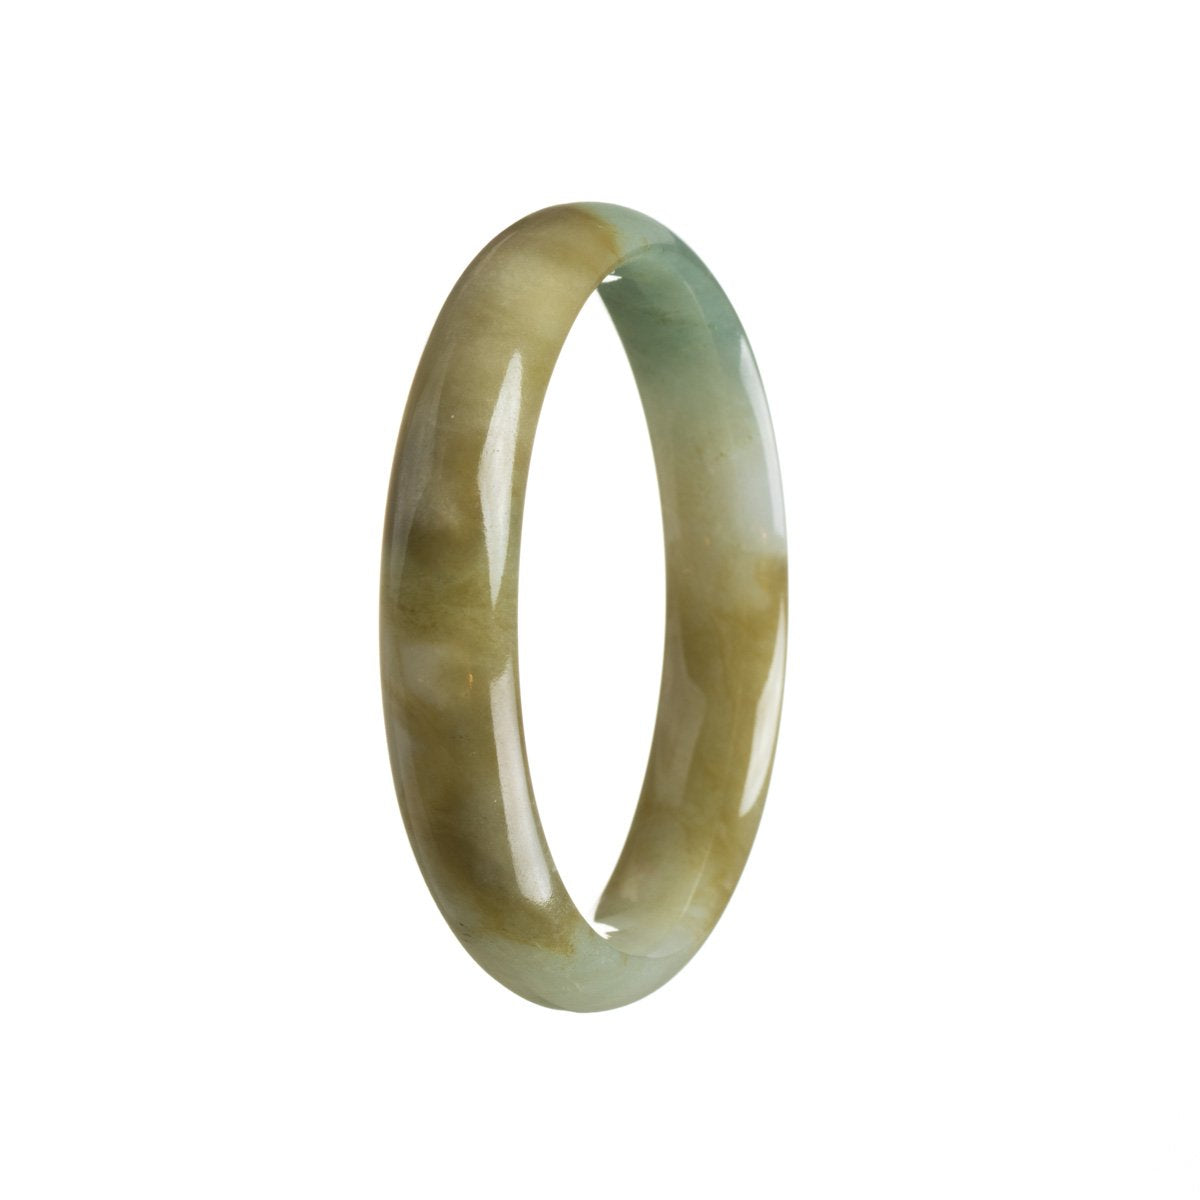 A half-moon shaped jade bracelet with a certified Grade A green color and brown sections, available in a 55mm size. Sold by MAYS GEMS.